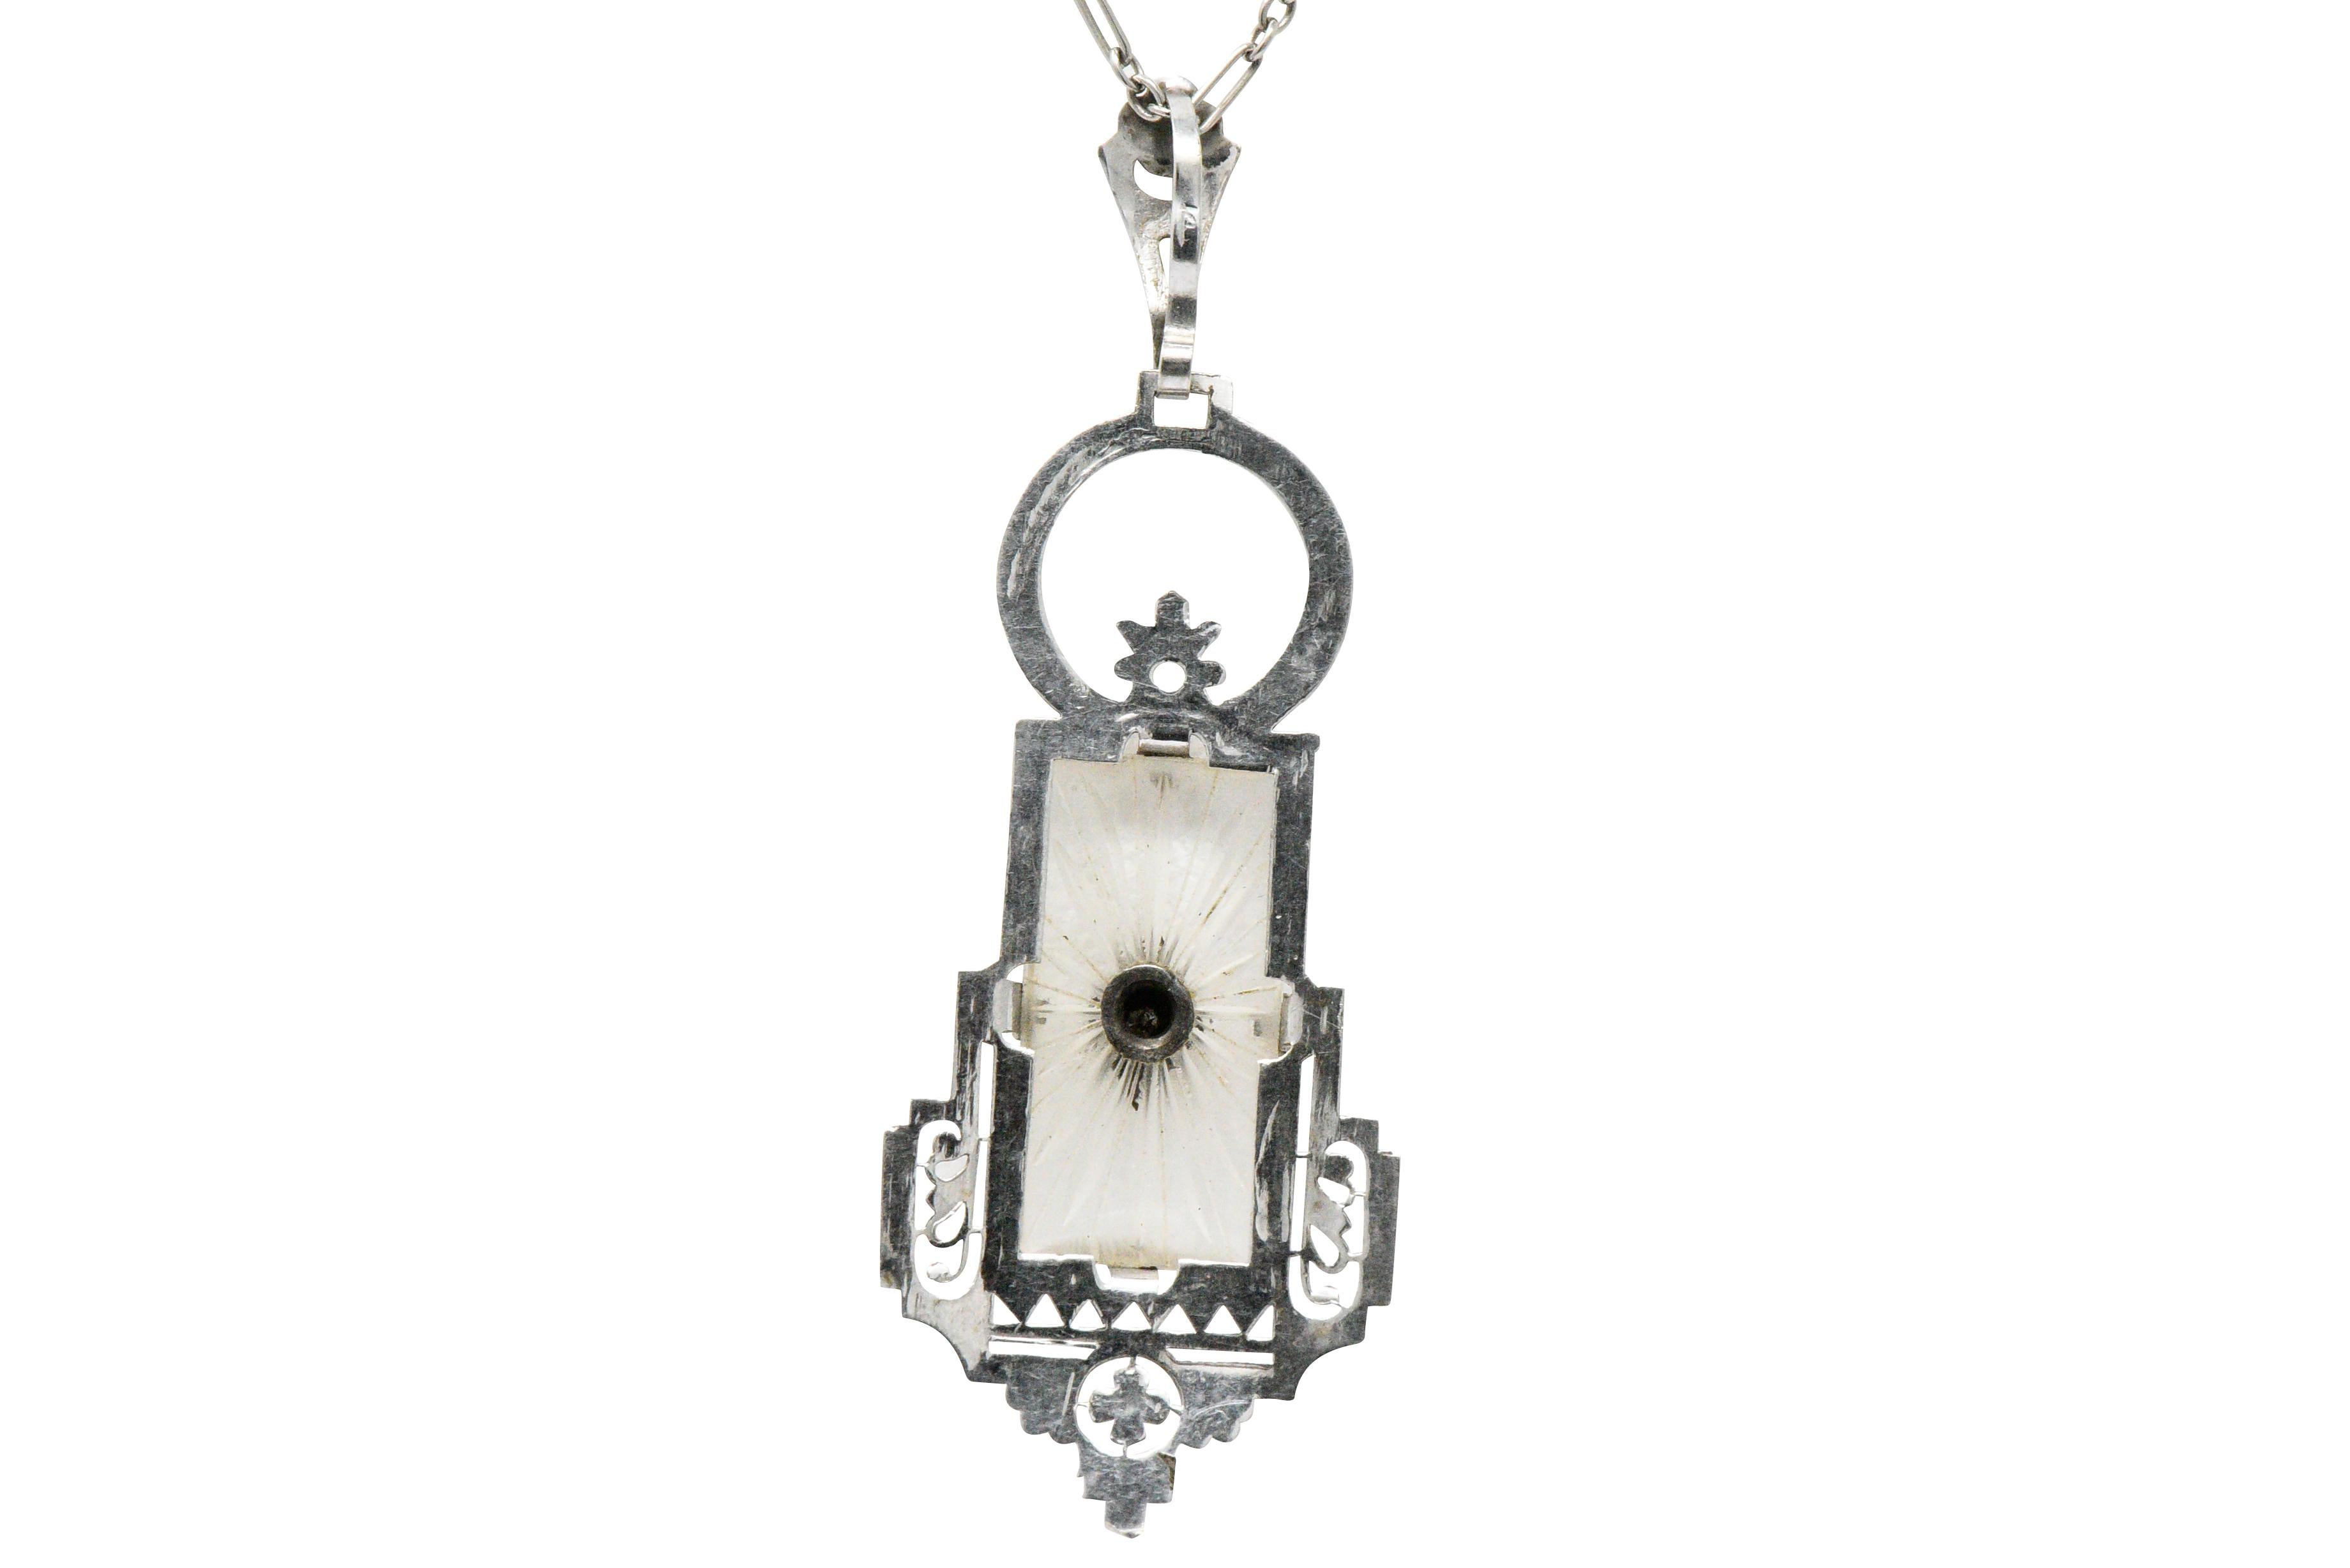 Pendant centering square carved camphor glass with inset single cut diamond weighing approximately 0.015 carats total

With a geometric and folate motif with hand engraved details

On an elongated cable chain

Pendant Length: Approx. 2 inches

Chain